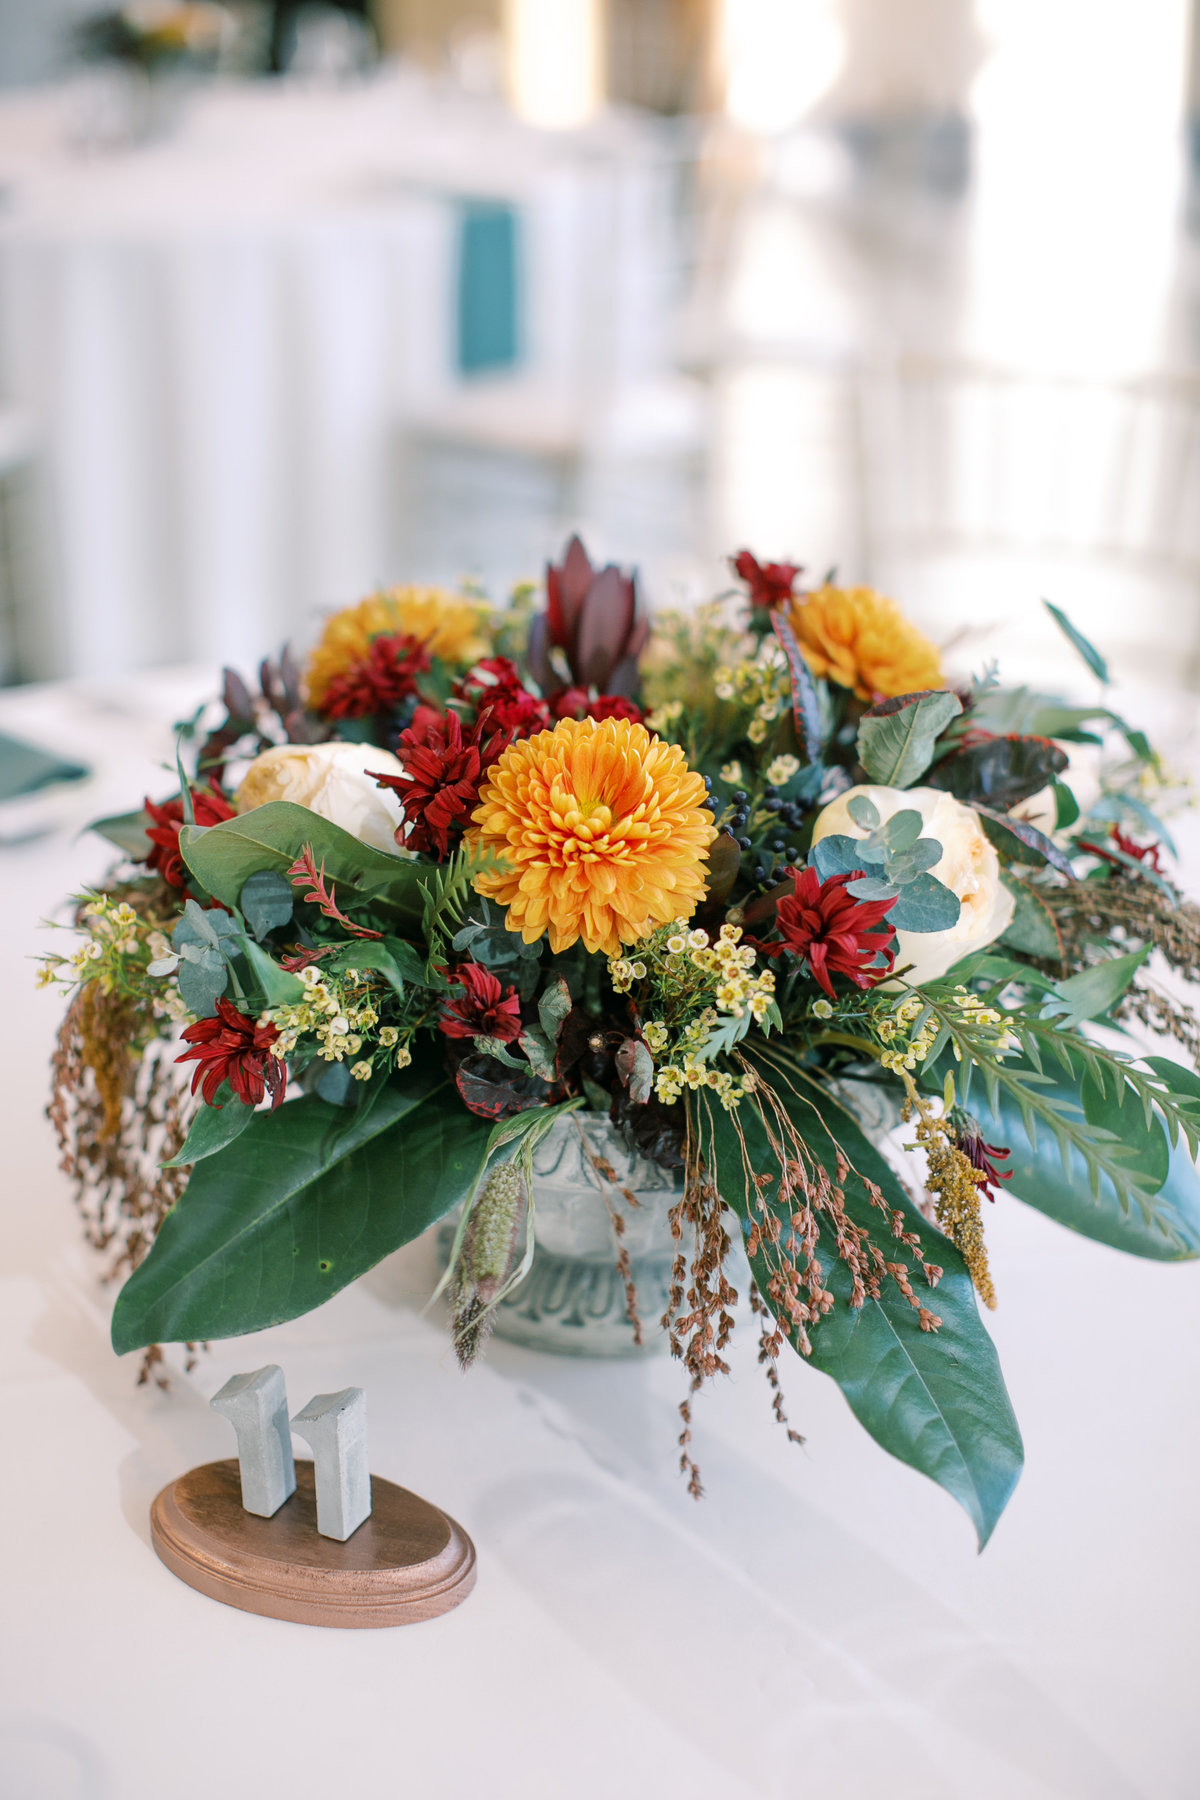 Reception table centerpiece with fall themed flowers and seedpods